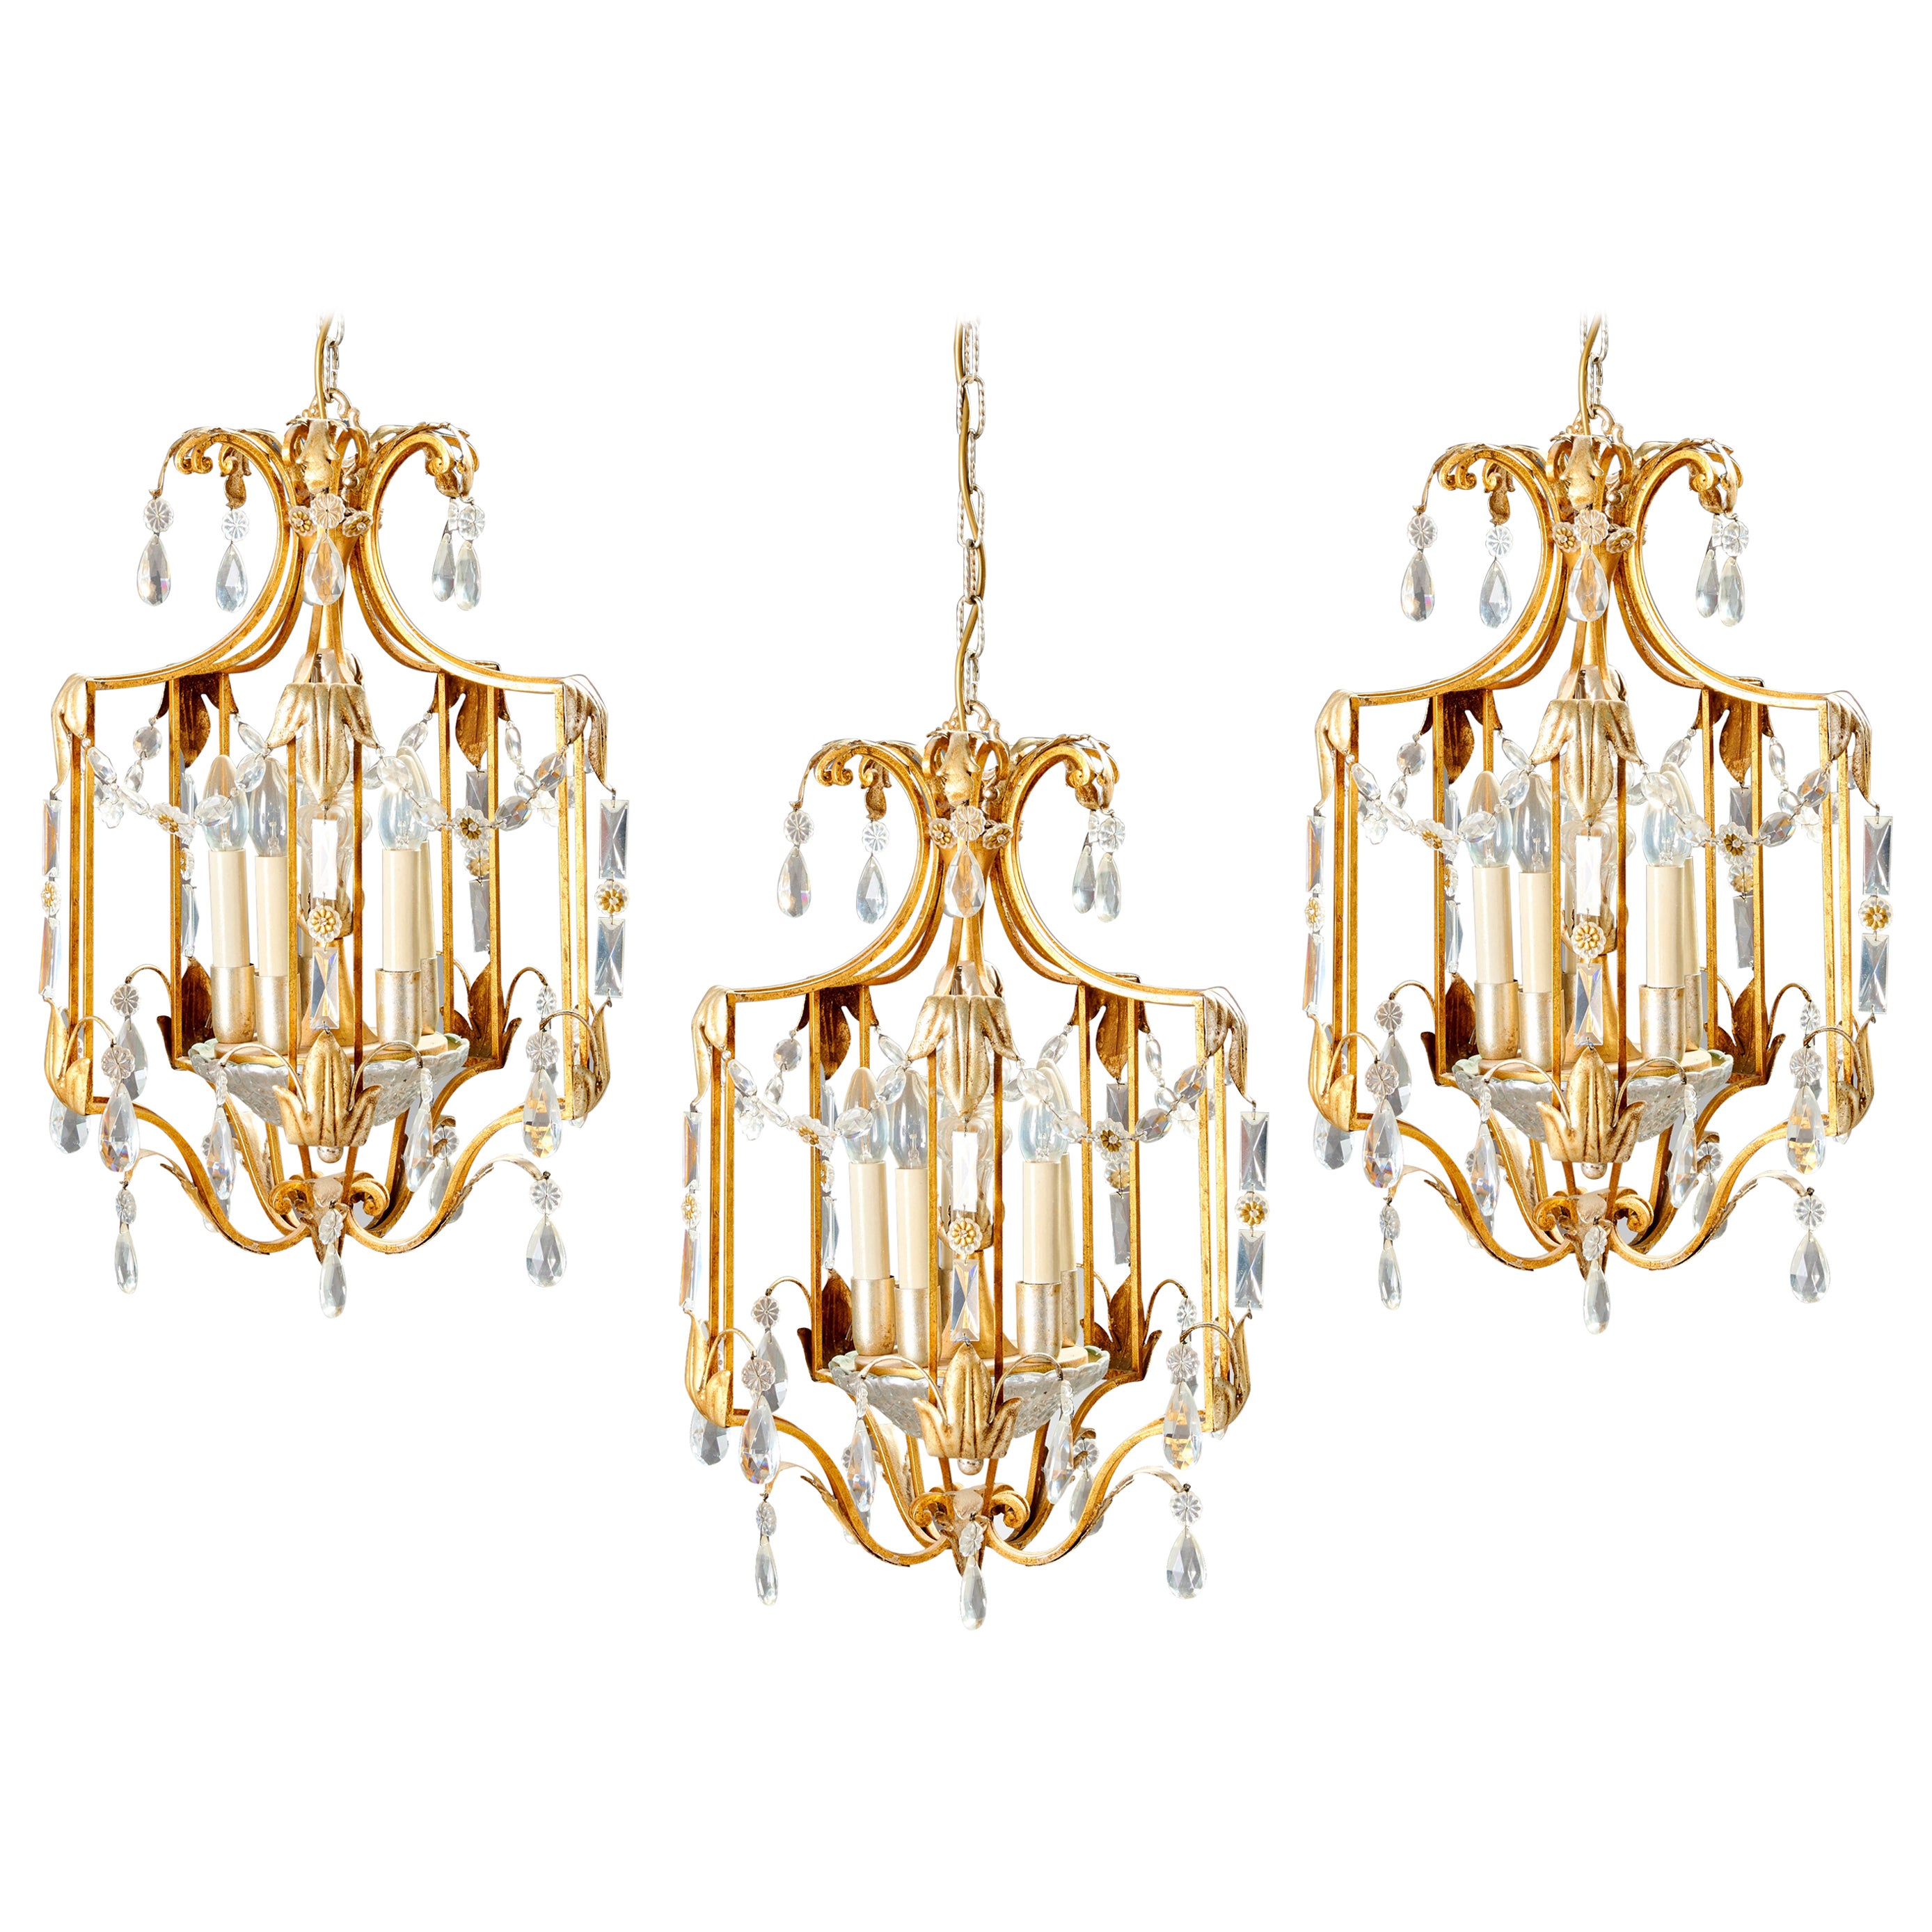 "Maison Baguès", Three Large and Elegant Lanterns in Gold and Silver Metal, 1950